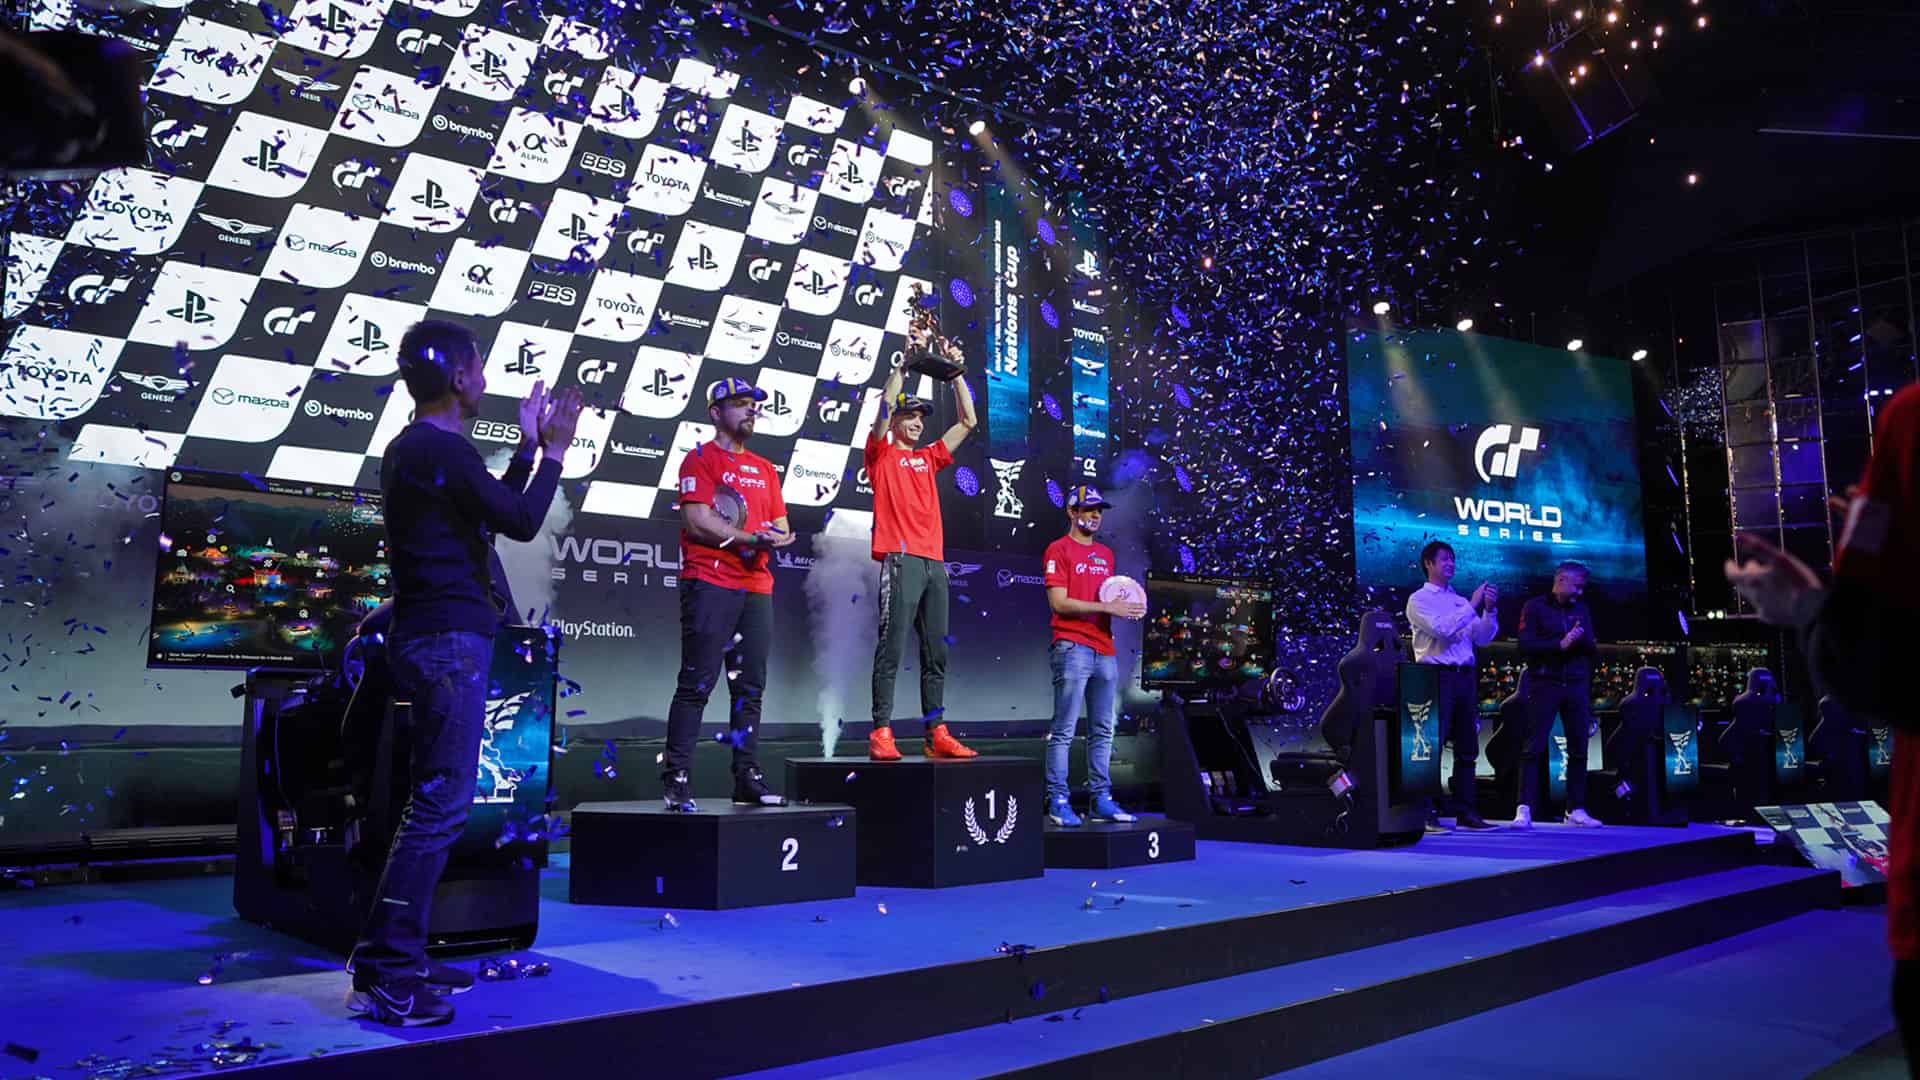 Why Gran Turismo's Word Series is an esports pioneer